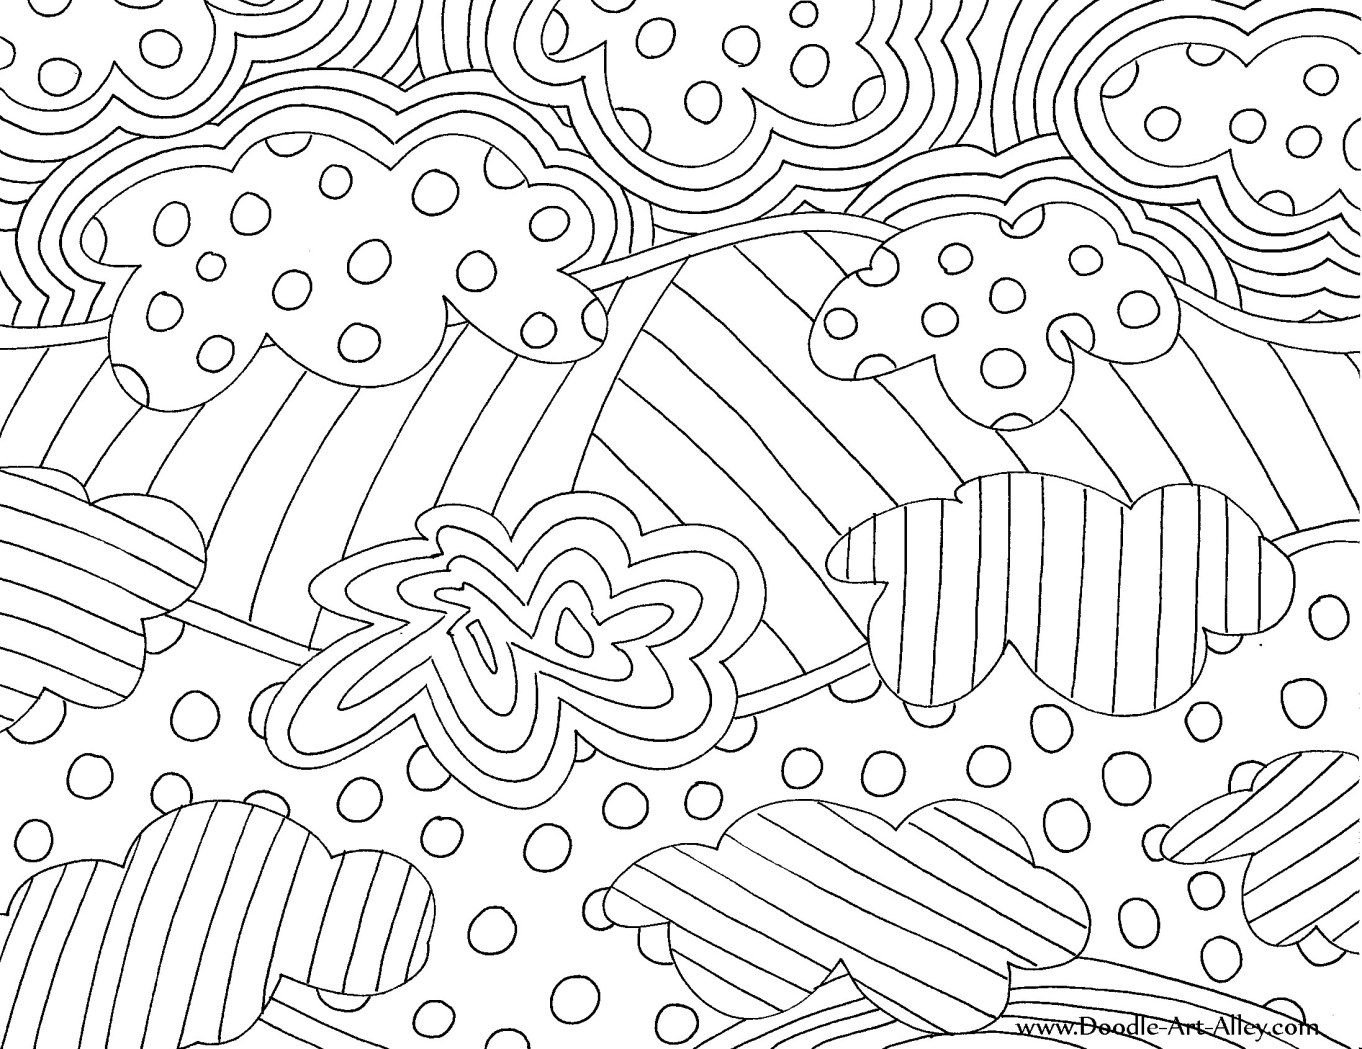 abstract coloring pages for kids abstract coloring pages 3 coloring pages to print kids pages for coloring abstract 